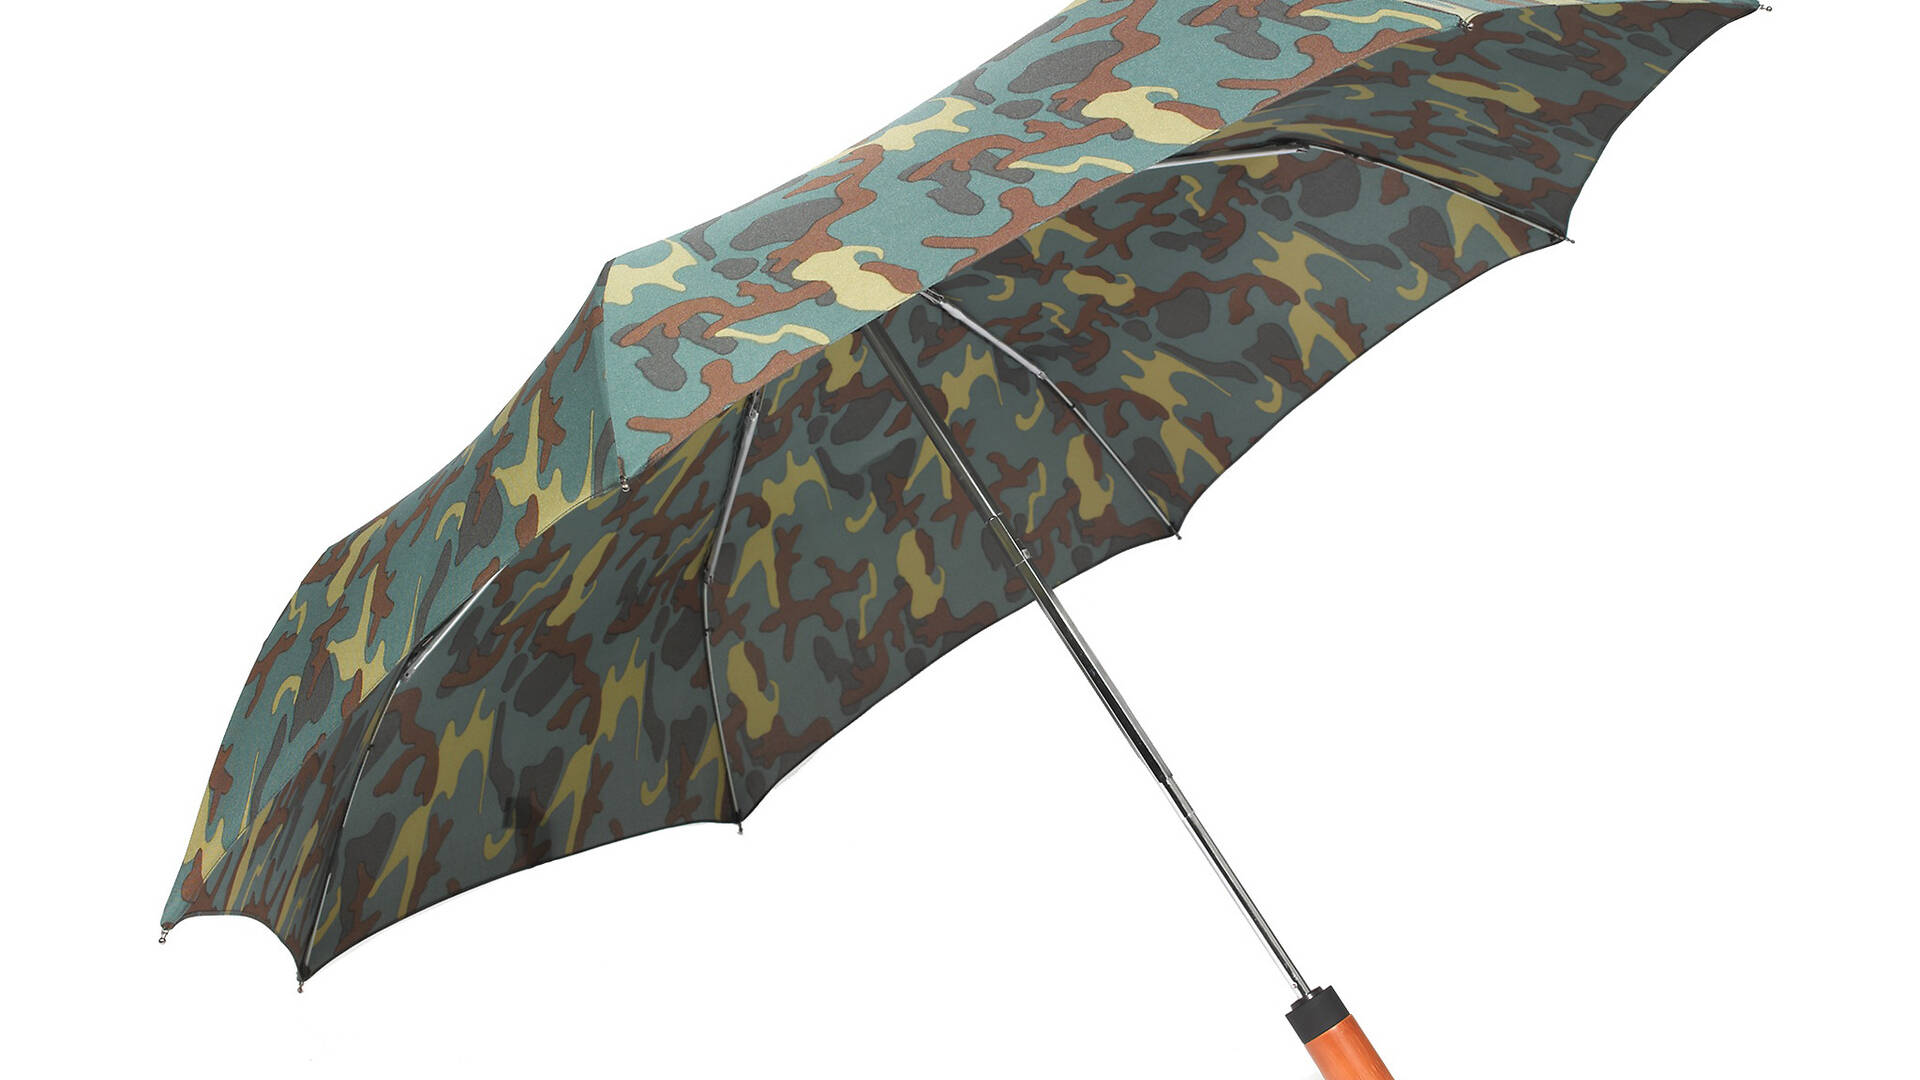 Best umbrellas and styles for staying dry in the rain in Chicago